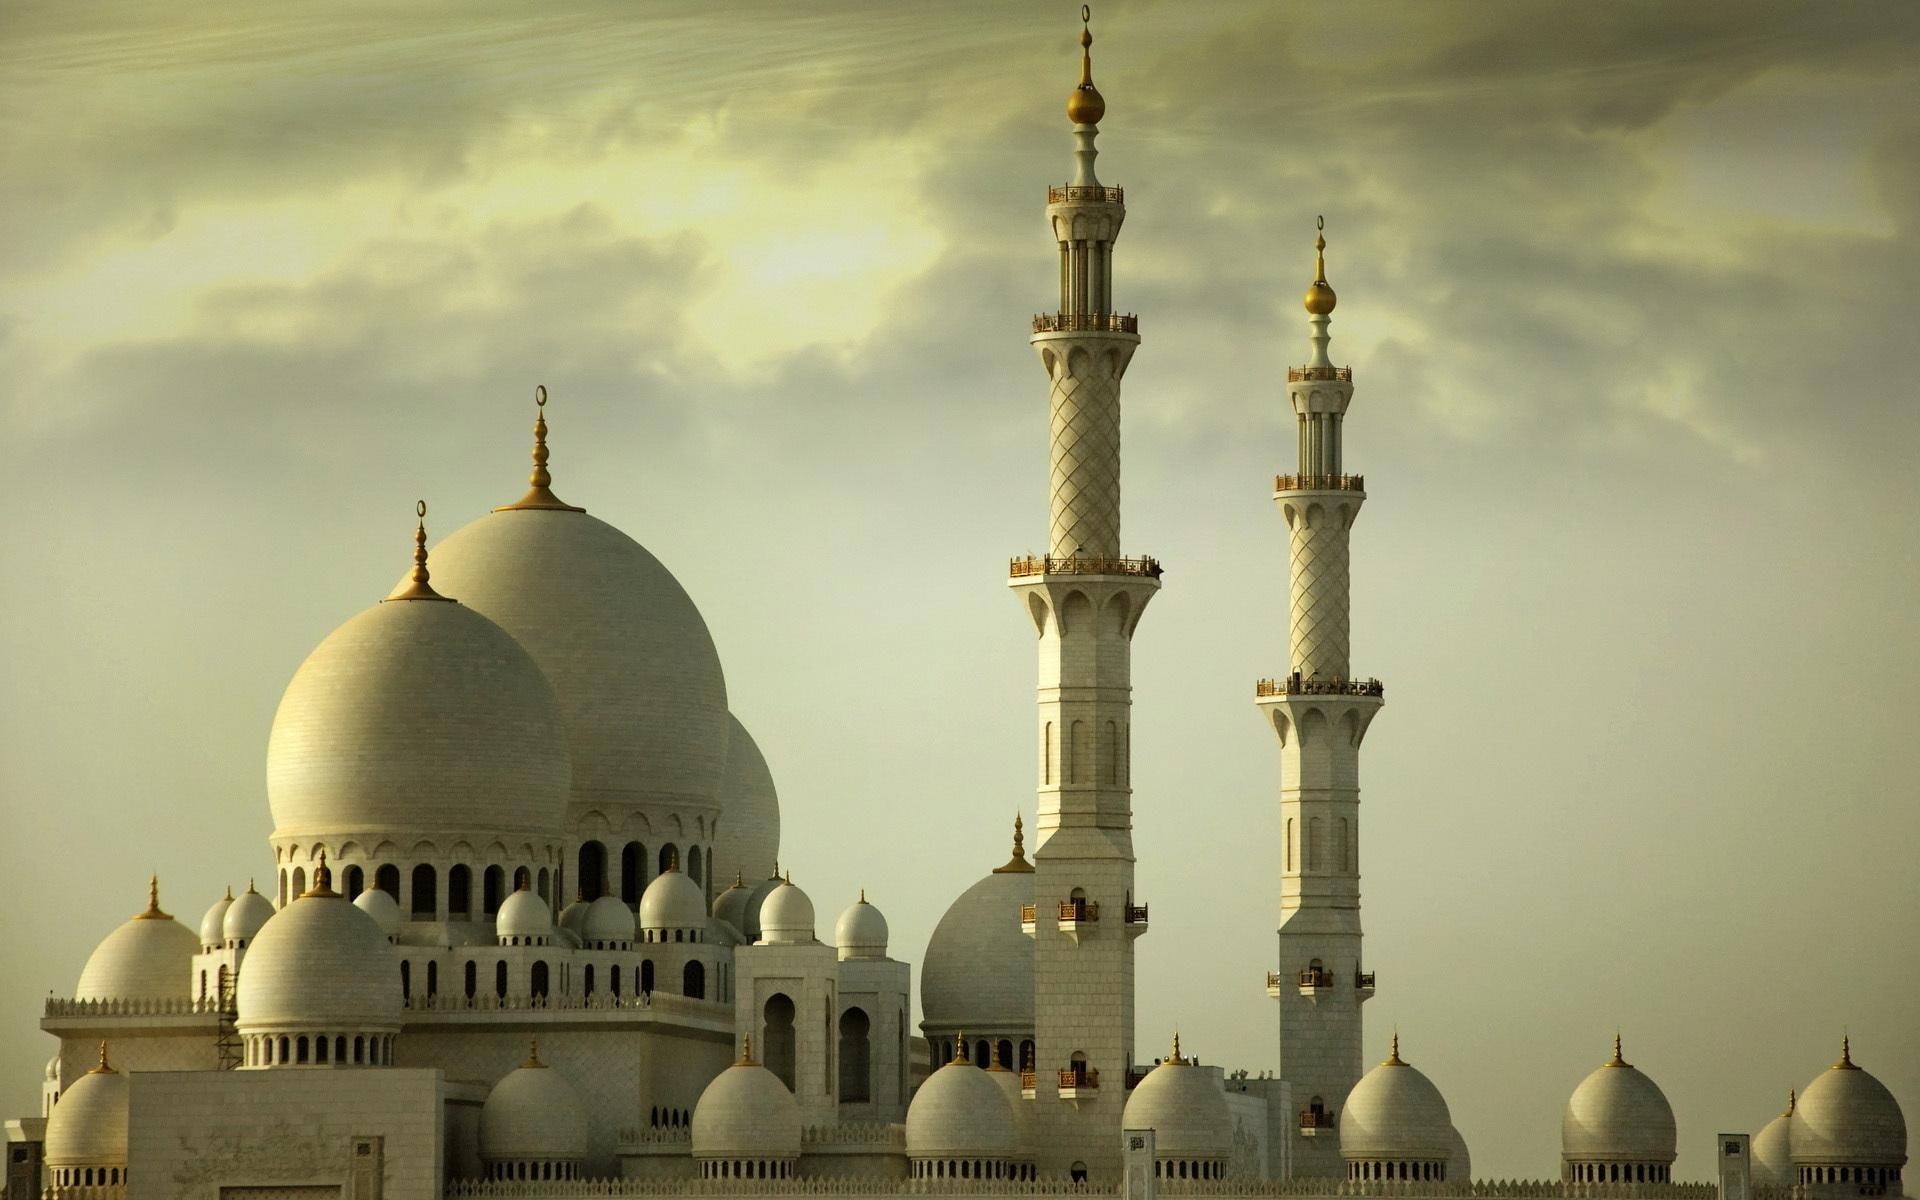 Mosque Abu Dhabi, nature and landscapes